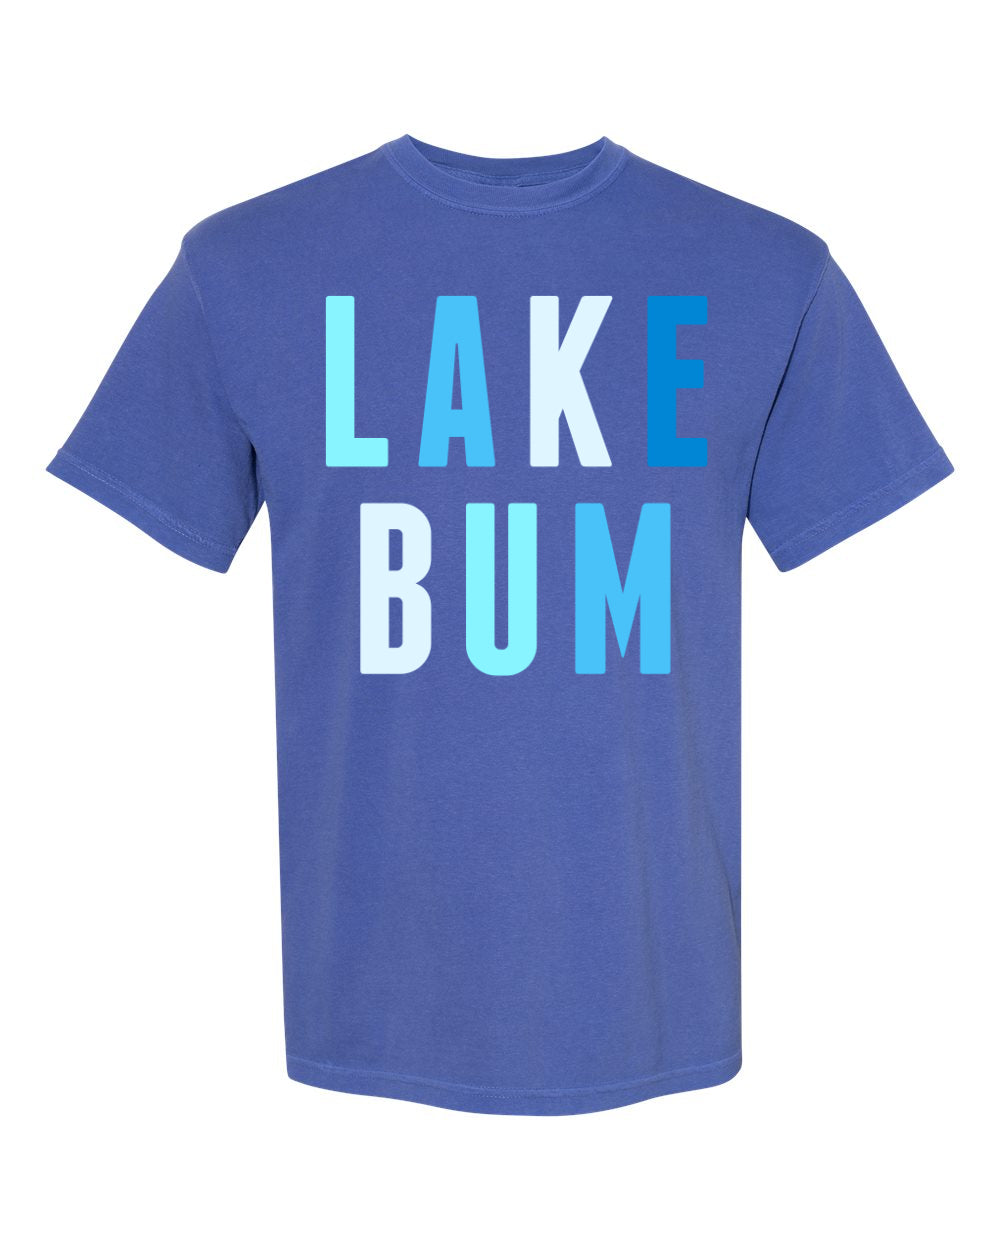 Lake Bum - SIZE UP 1-2 SIZES FOR A PERFECT COVER UP!